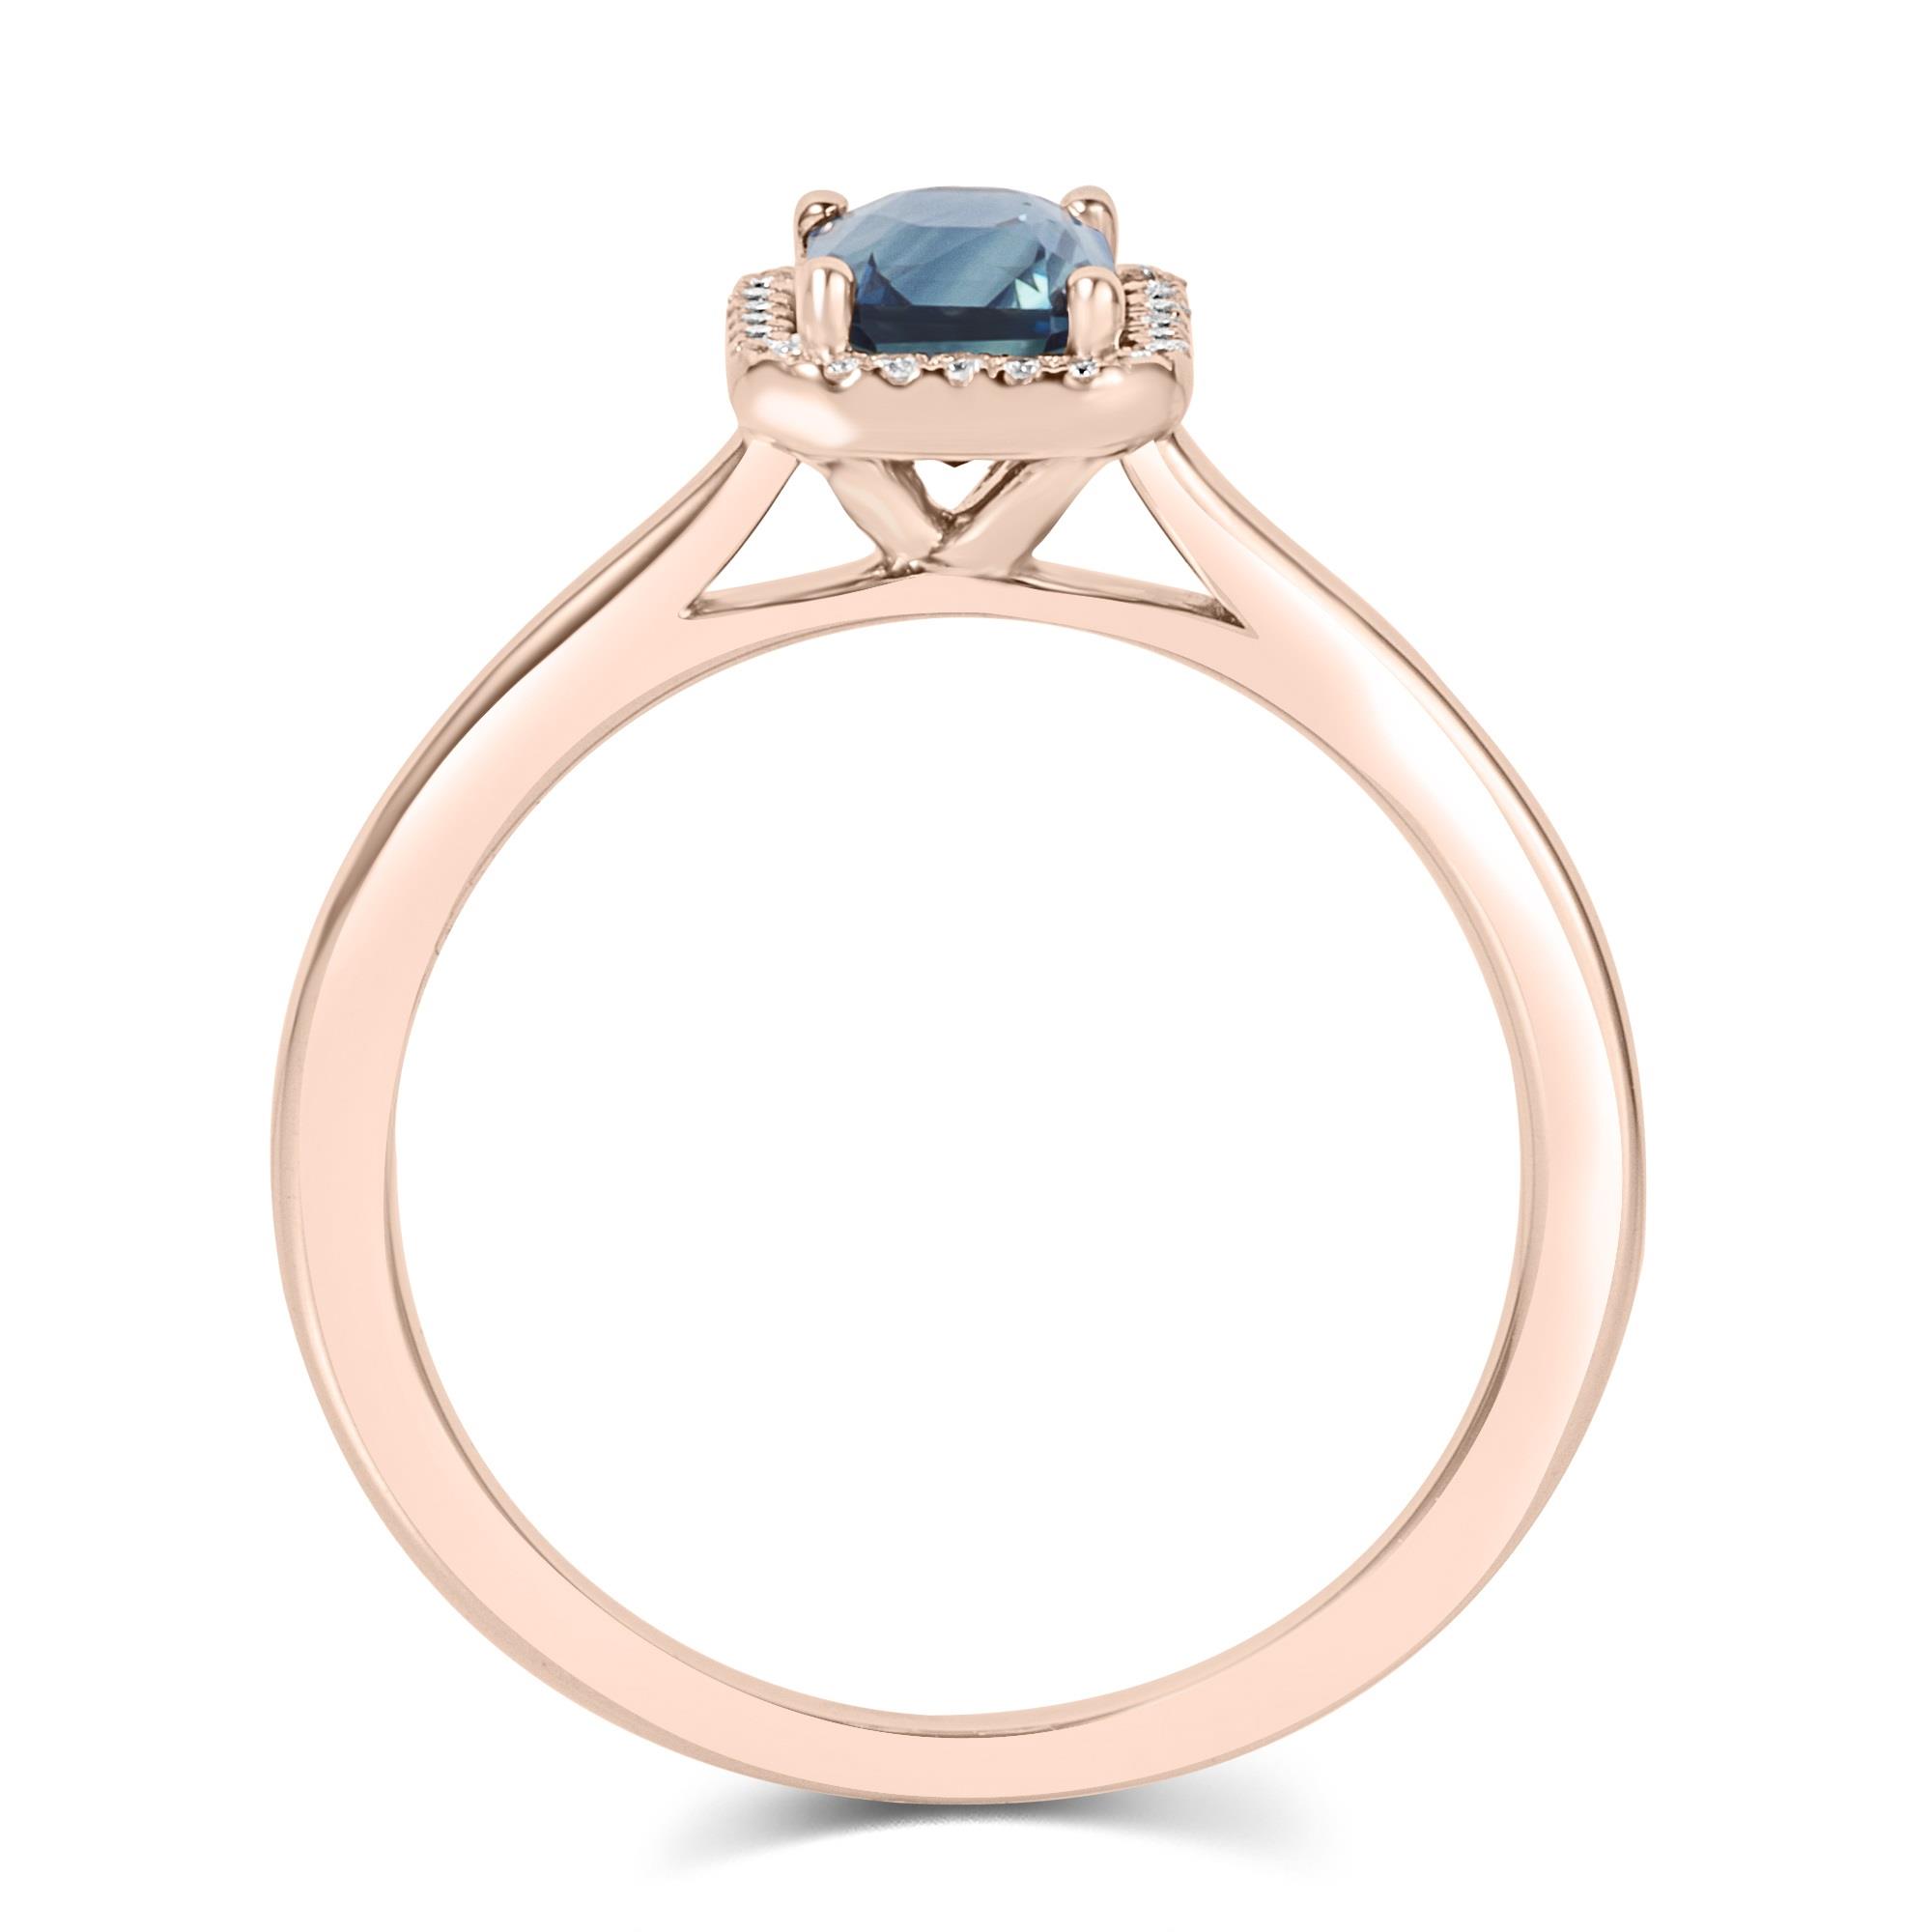 Emerald Cut Teal Sapphire and Diamond Halo Ring | Pravins